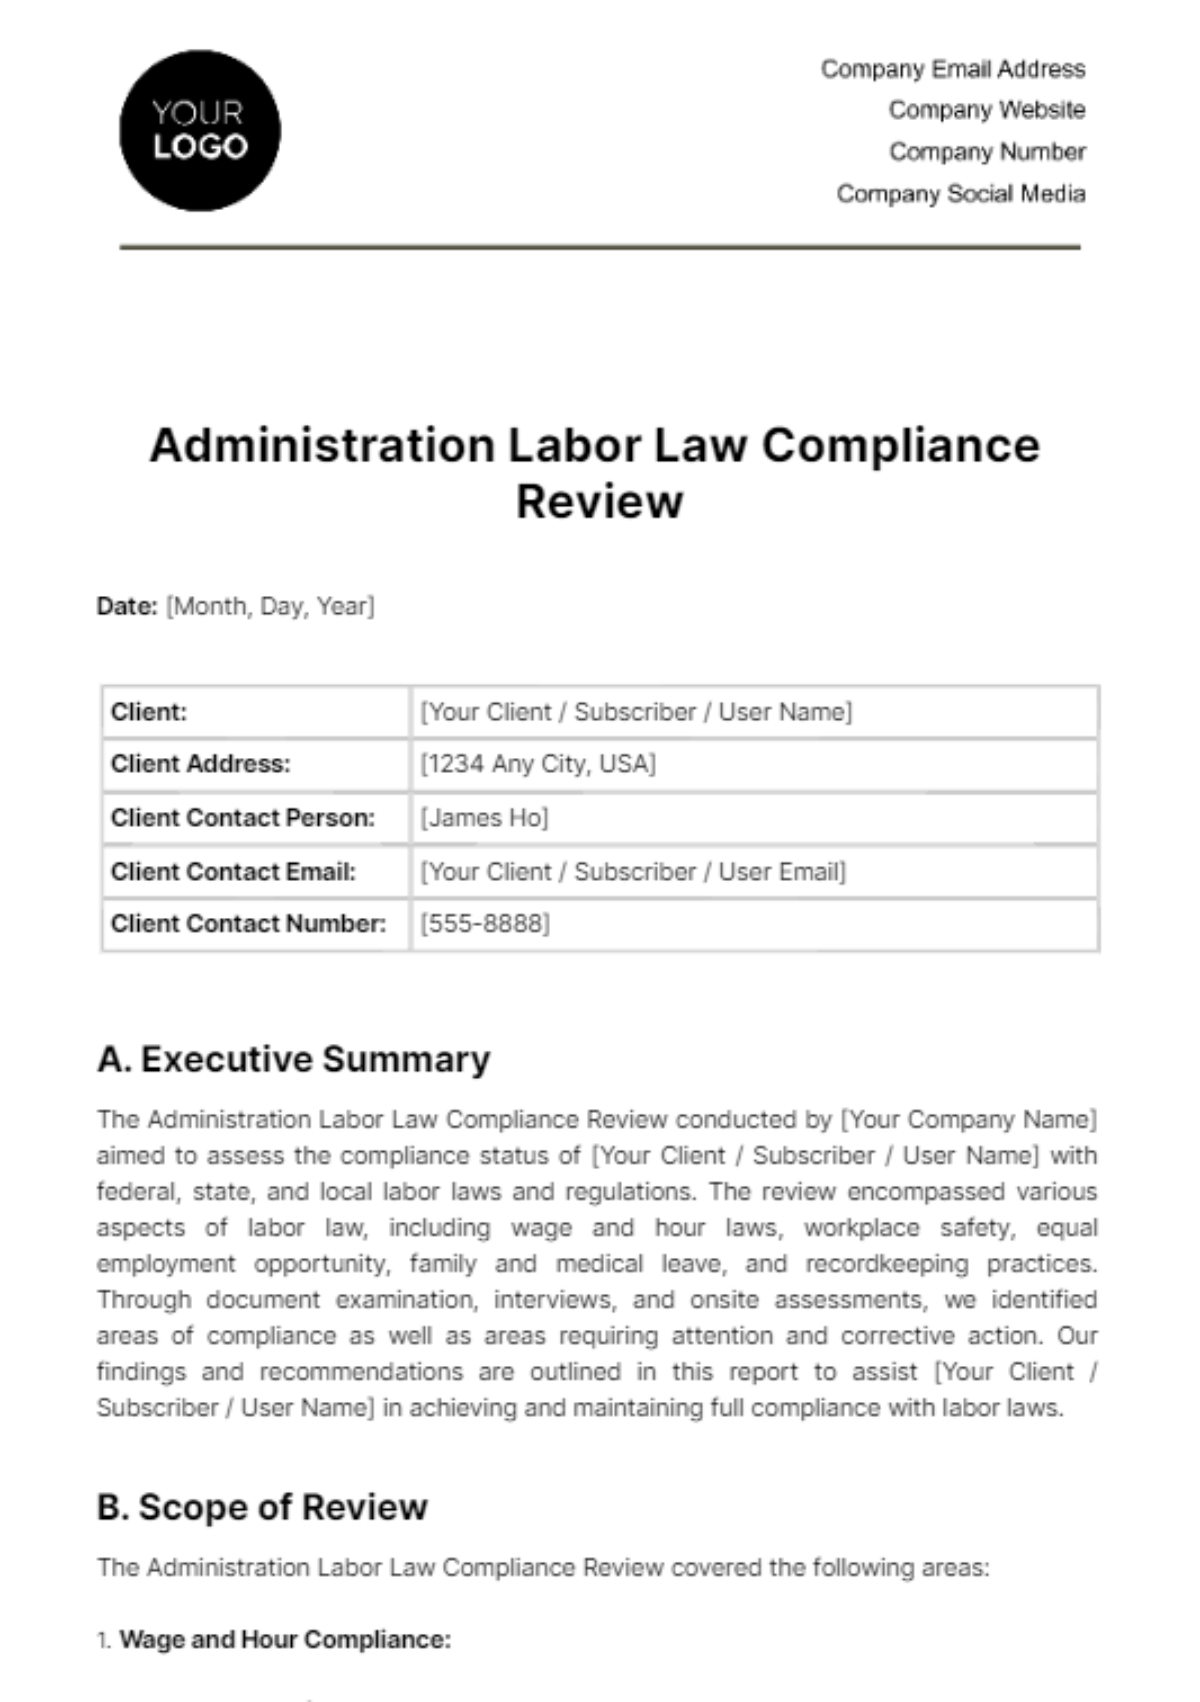 Free Administration Labor Law Compliance Review Template